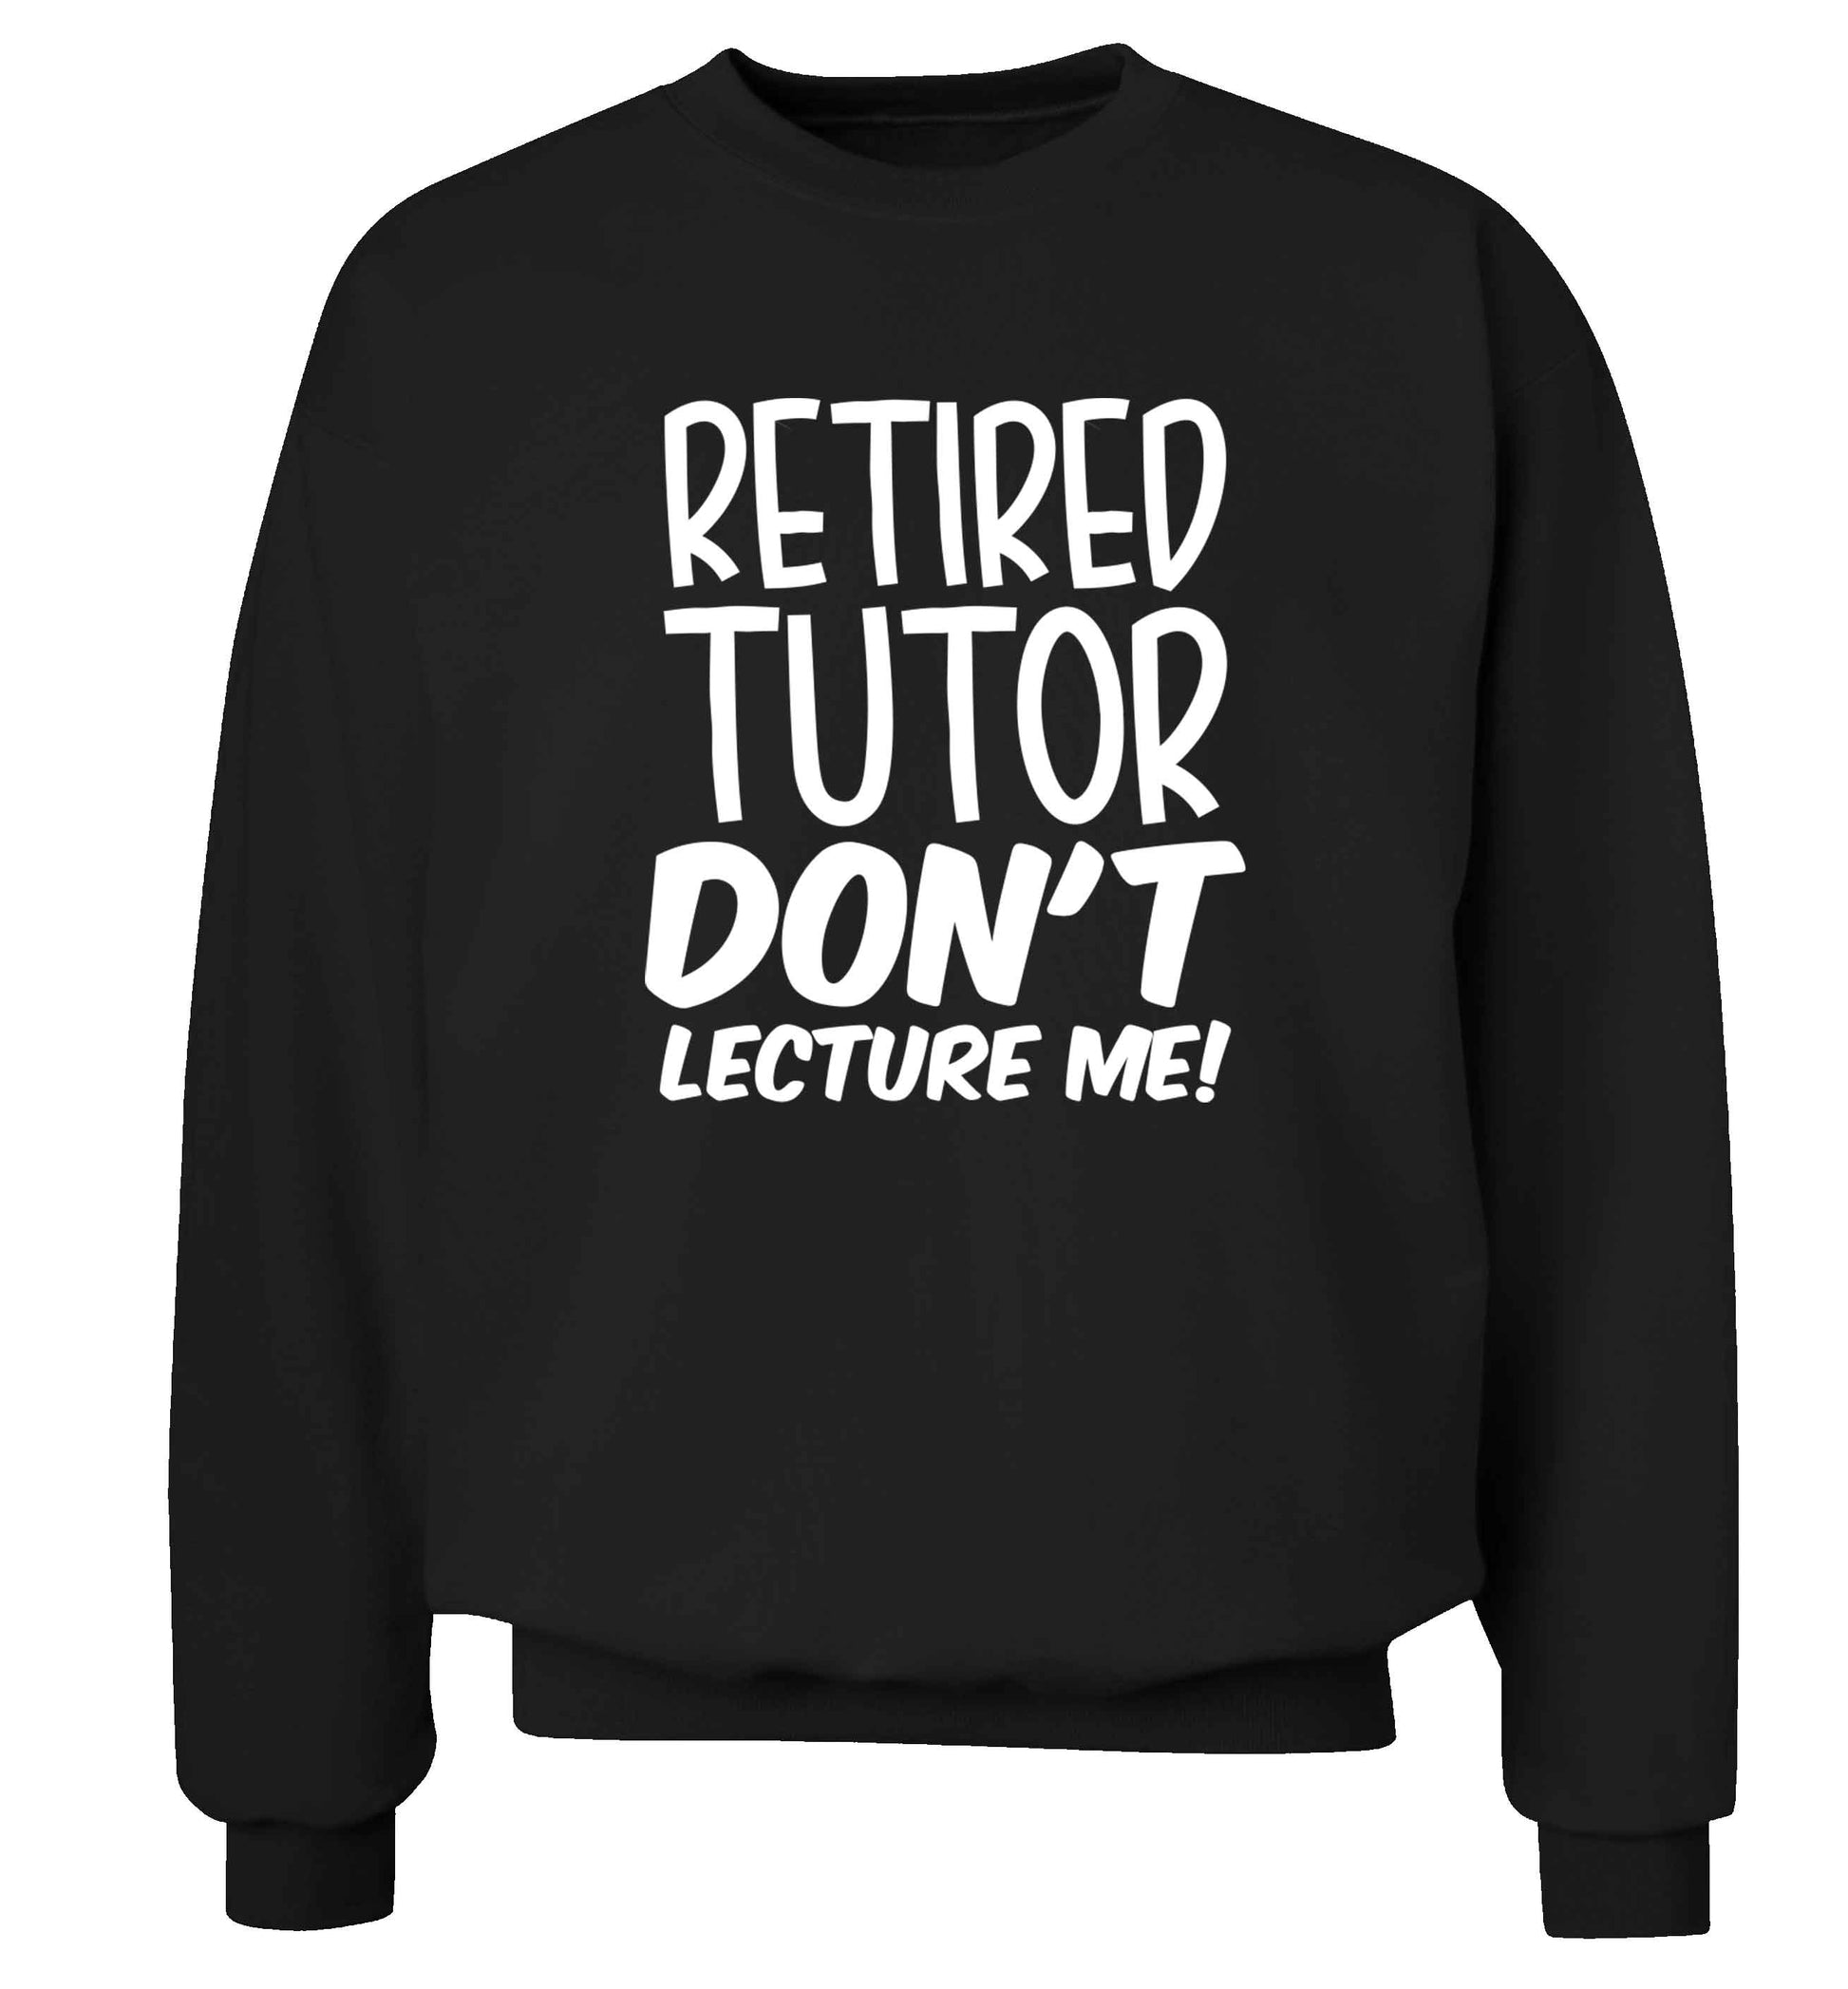 Retired tutor don't lecture me! Adult's unisex black Sweater 2XL